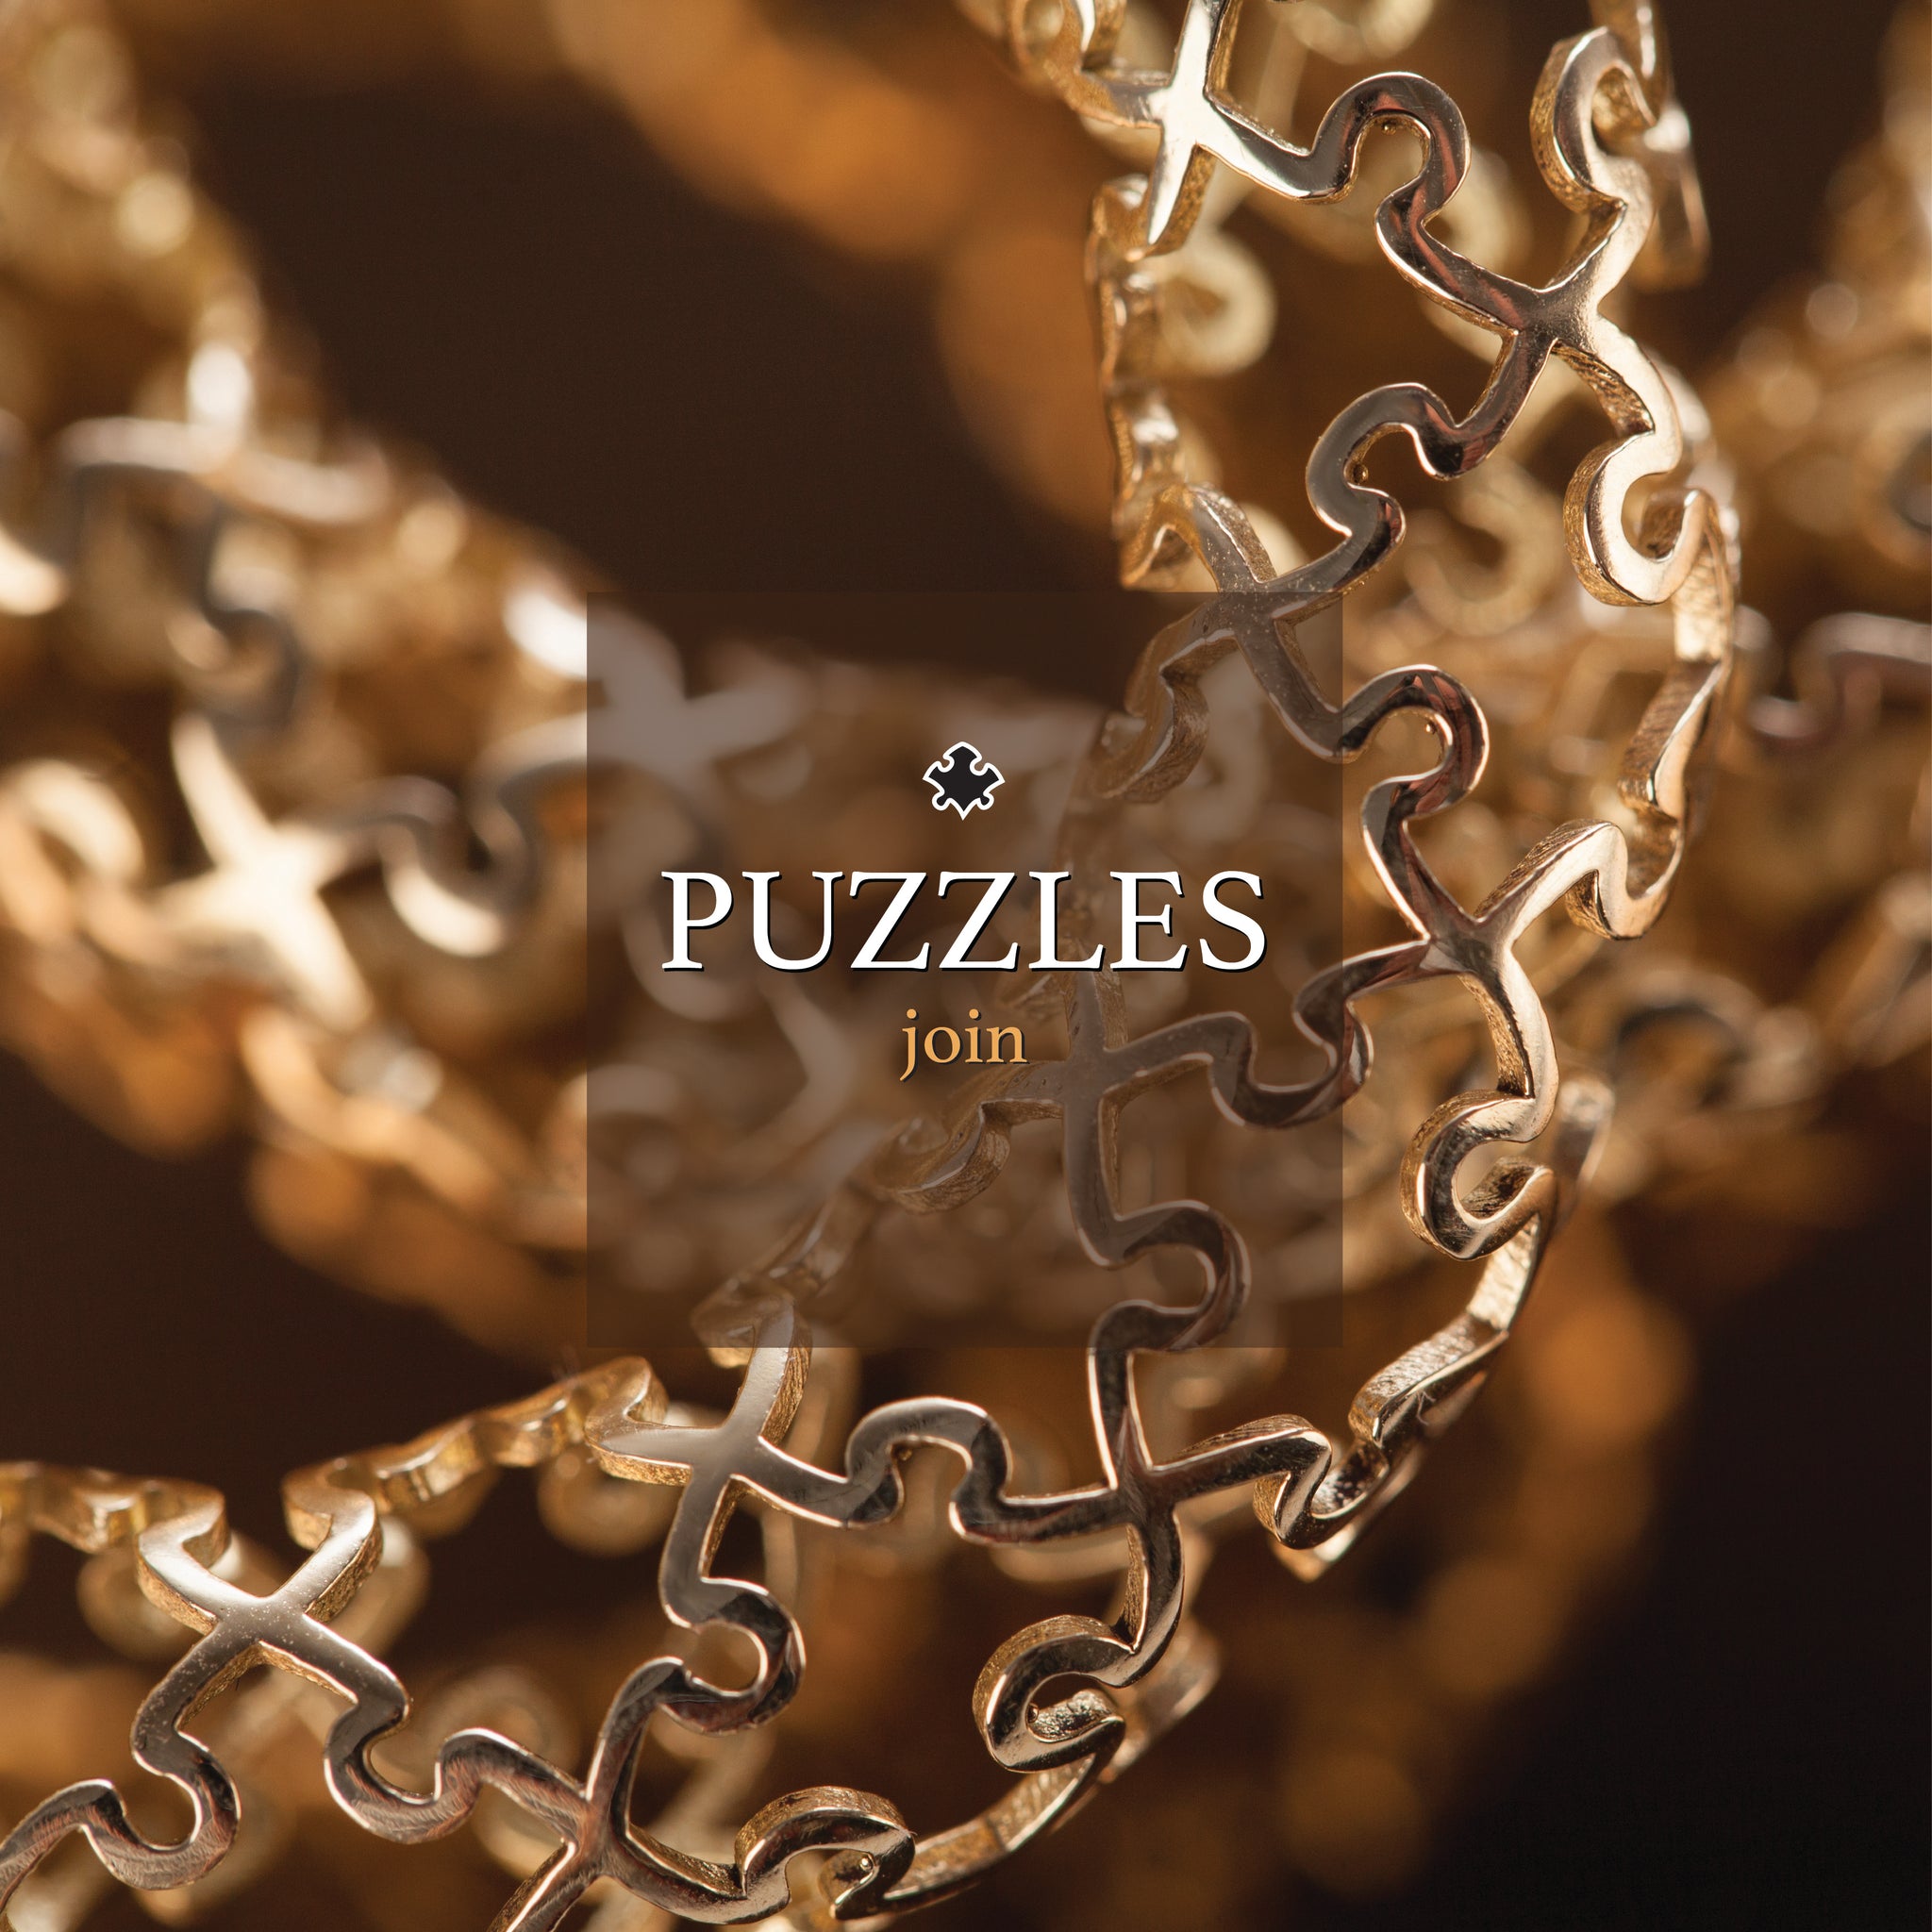 The Puzzles Collection